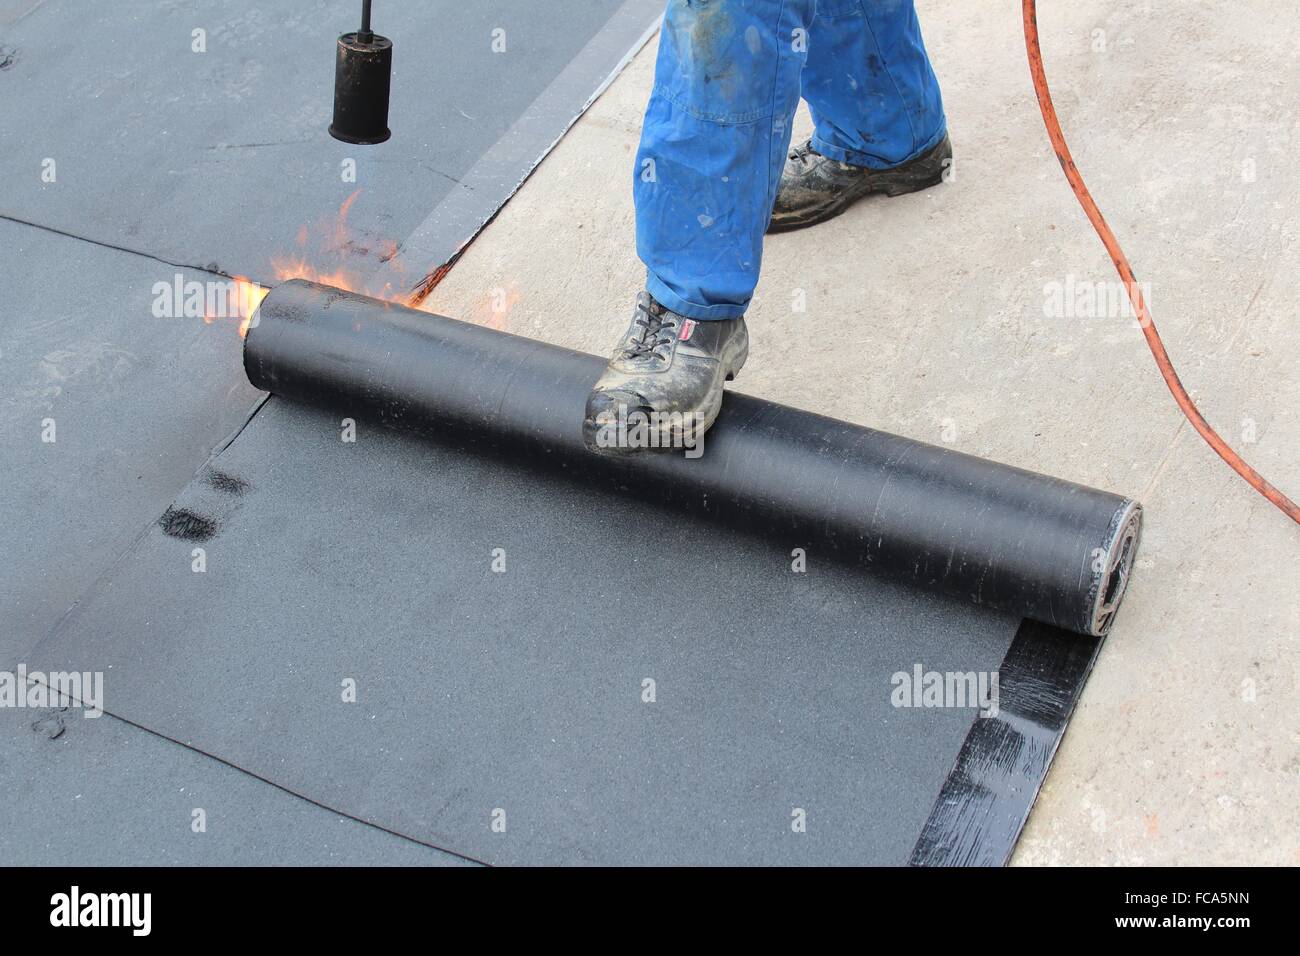 KEMPER SYSTEM - Flat roof systems and roofing products